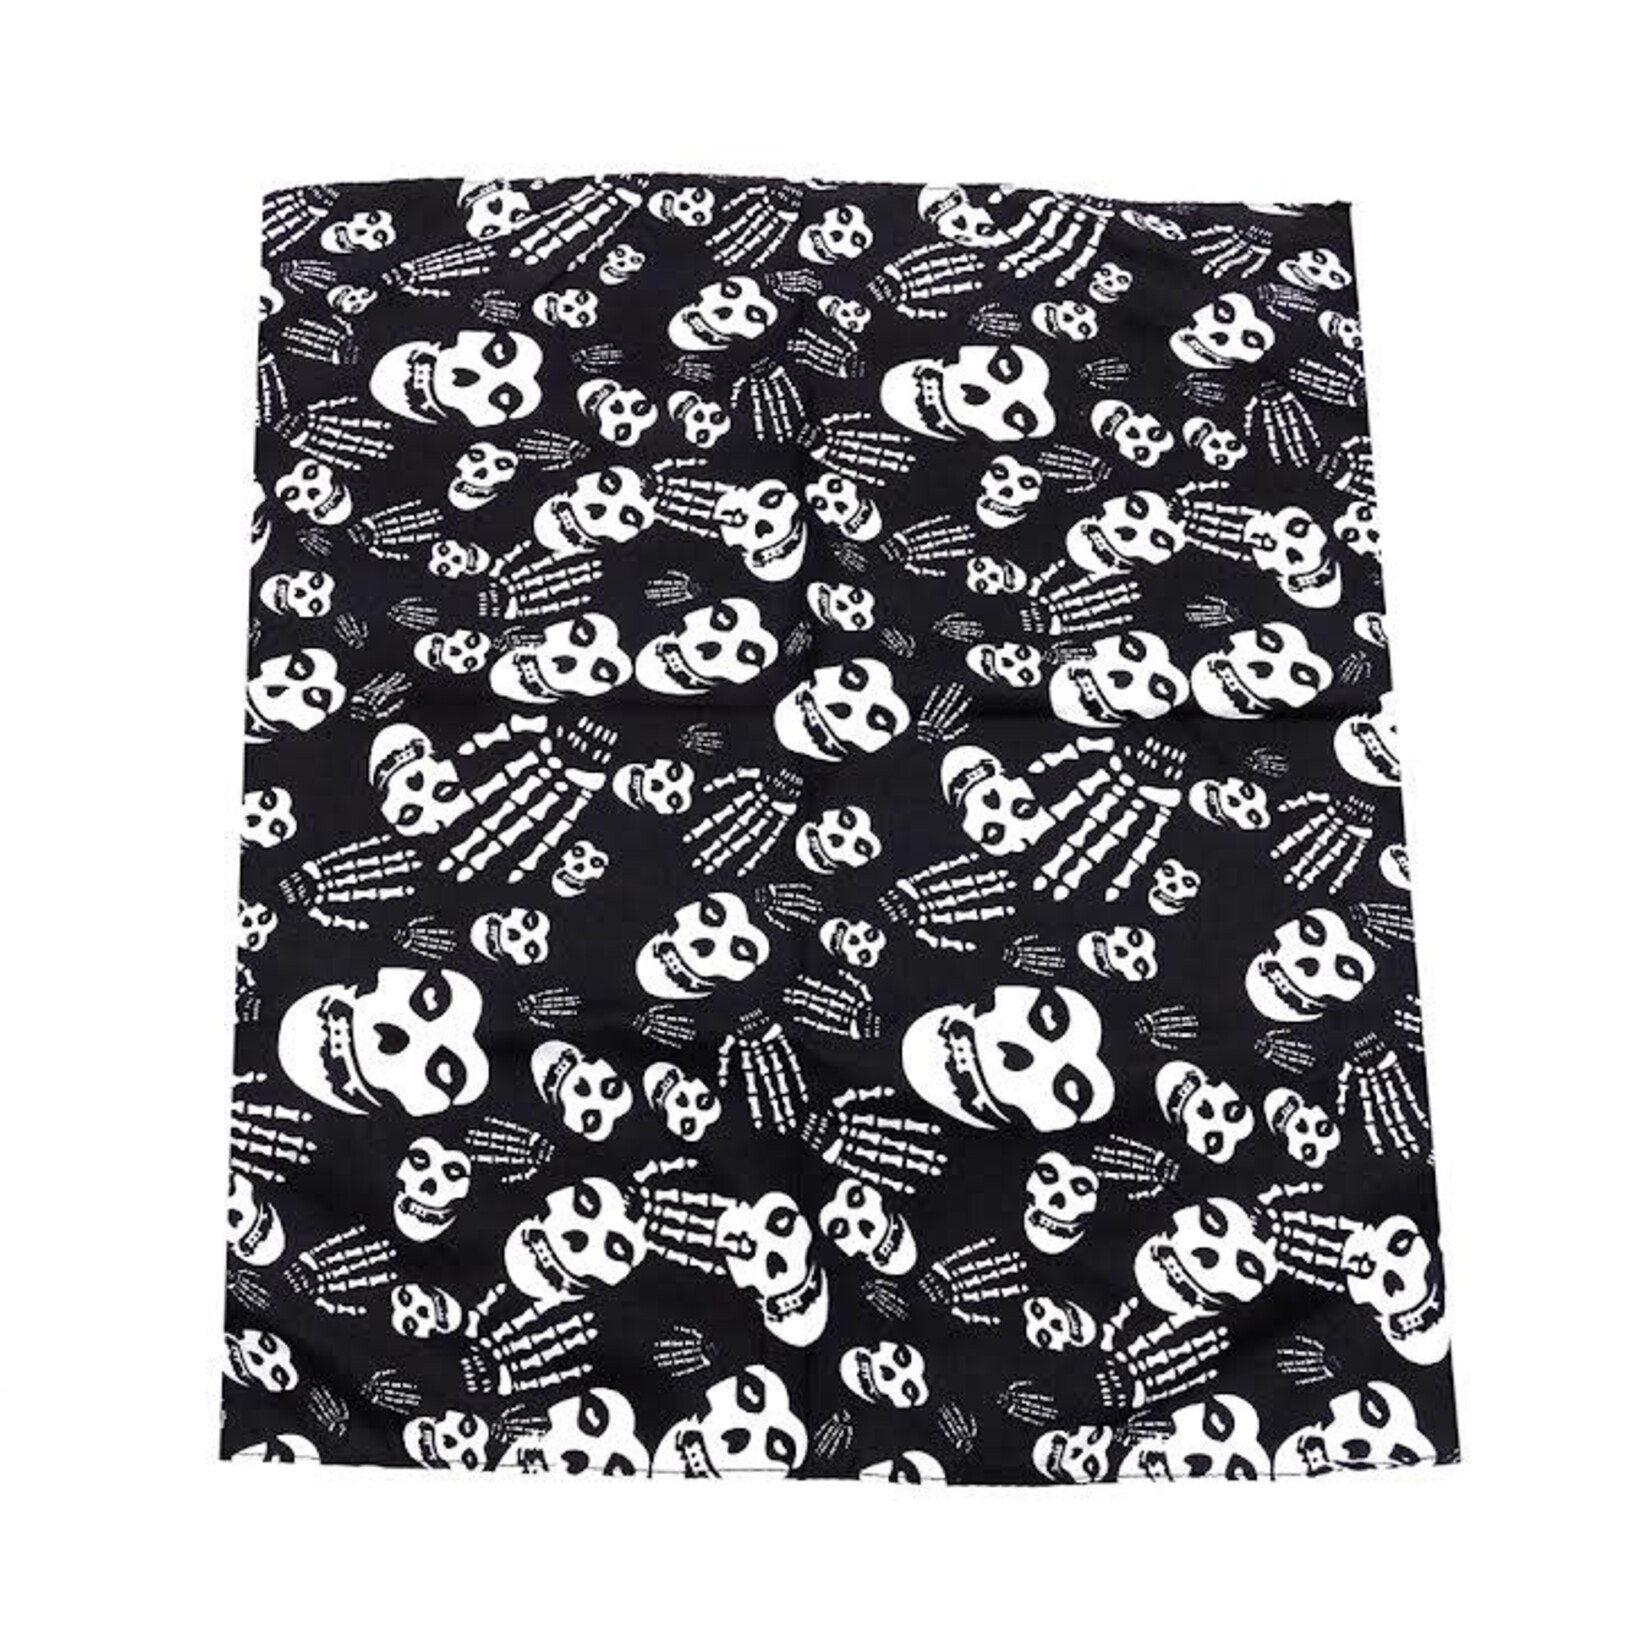 Bandana Patterned Skull With Hands